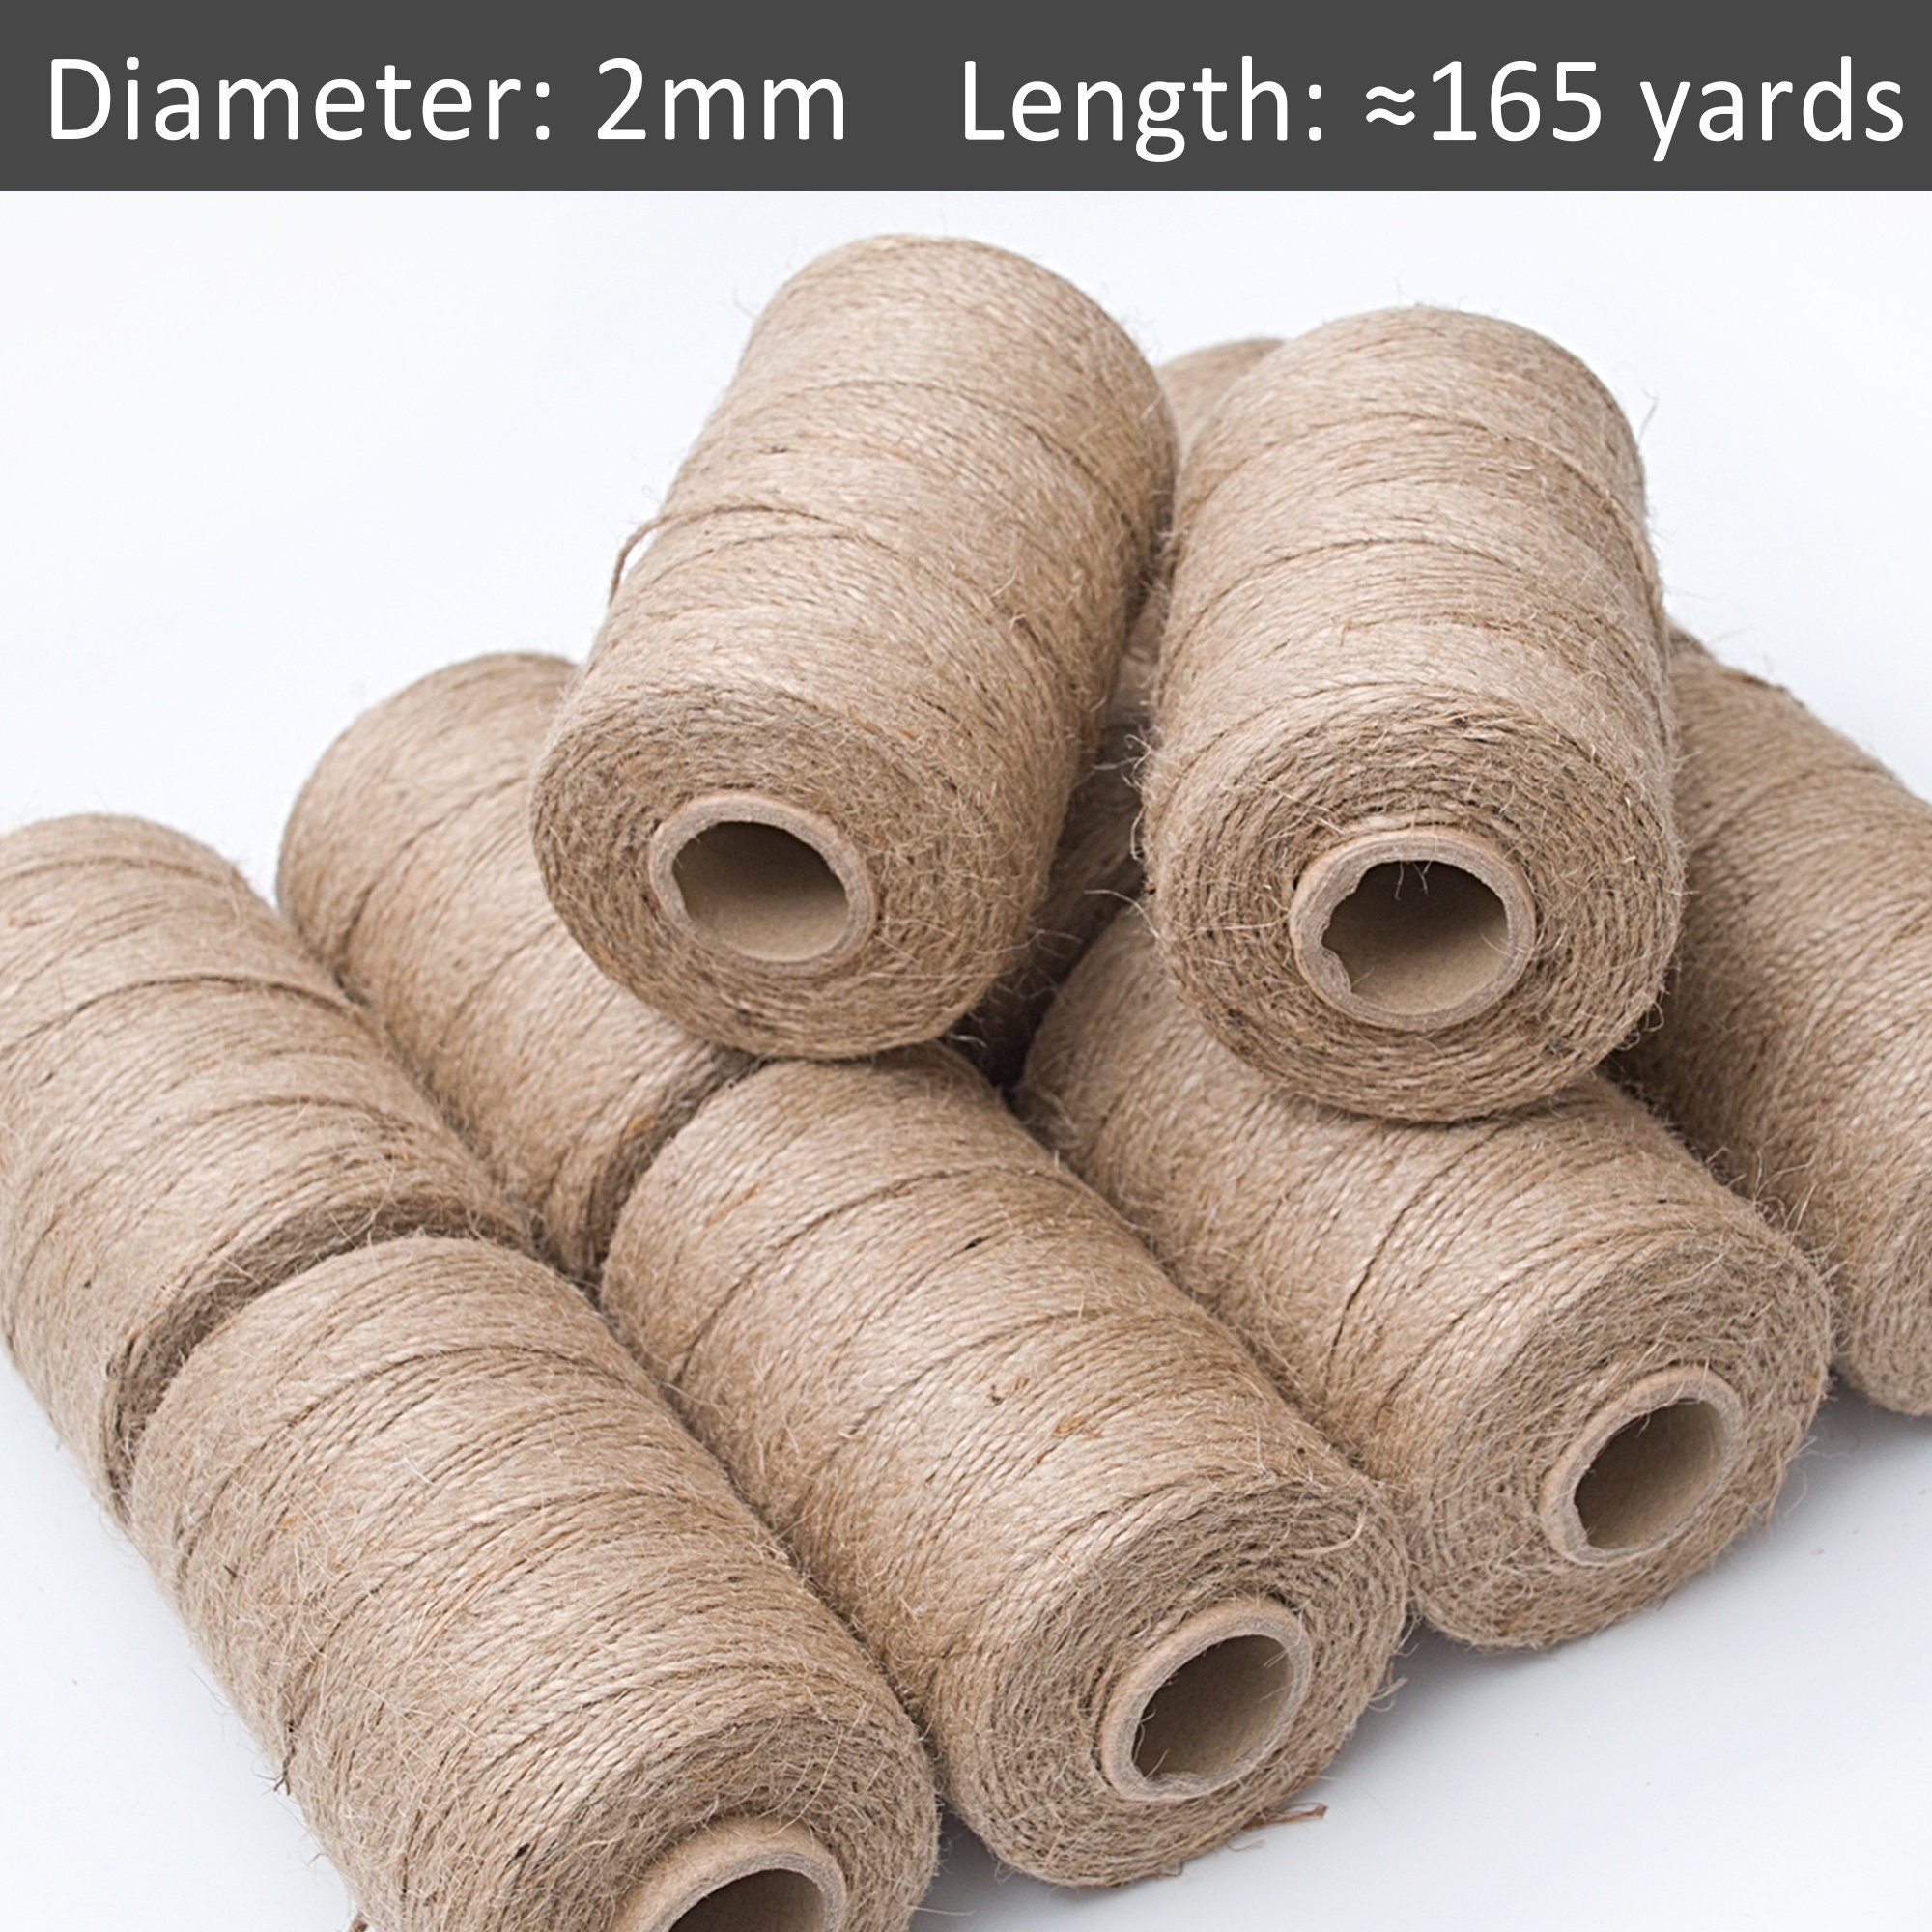 2mm Natural Jute Twine Rope Cord, Non-polished Gift Wrap, Packaging,  Eco-friendly Hemp Yarn 100 G 55 Yards 